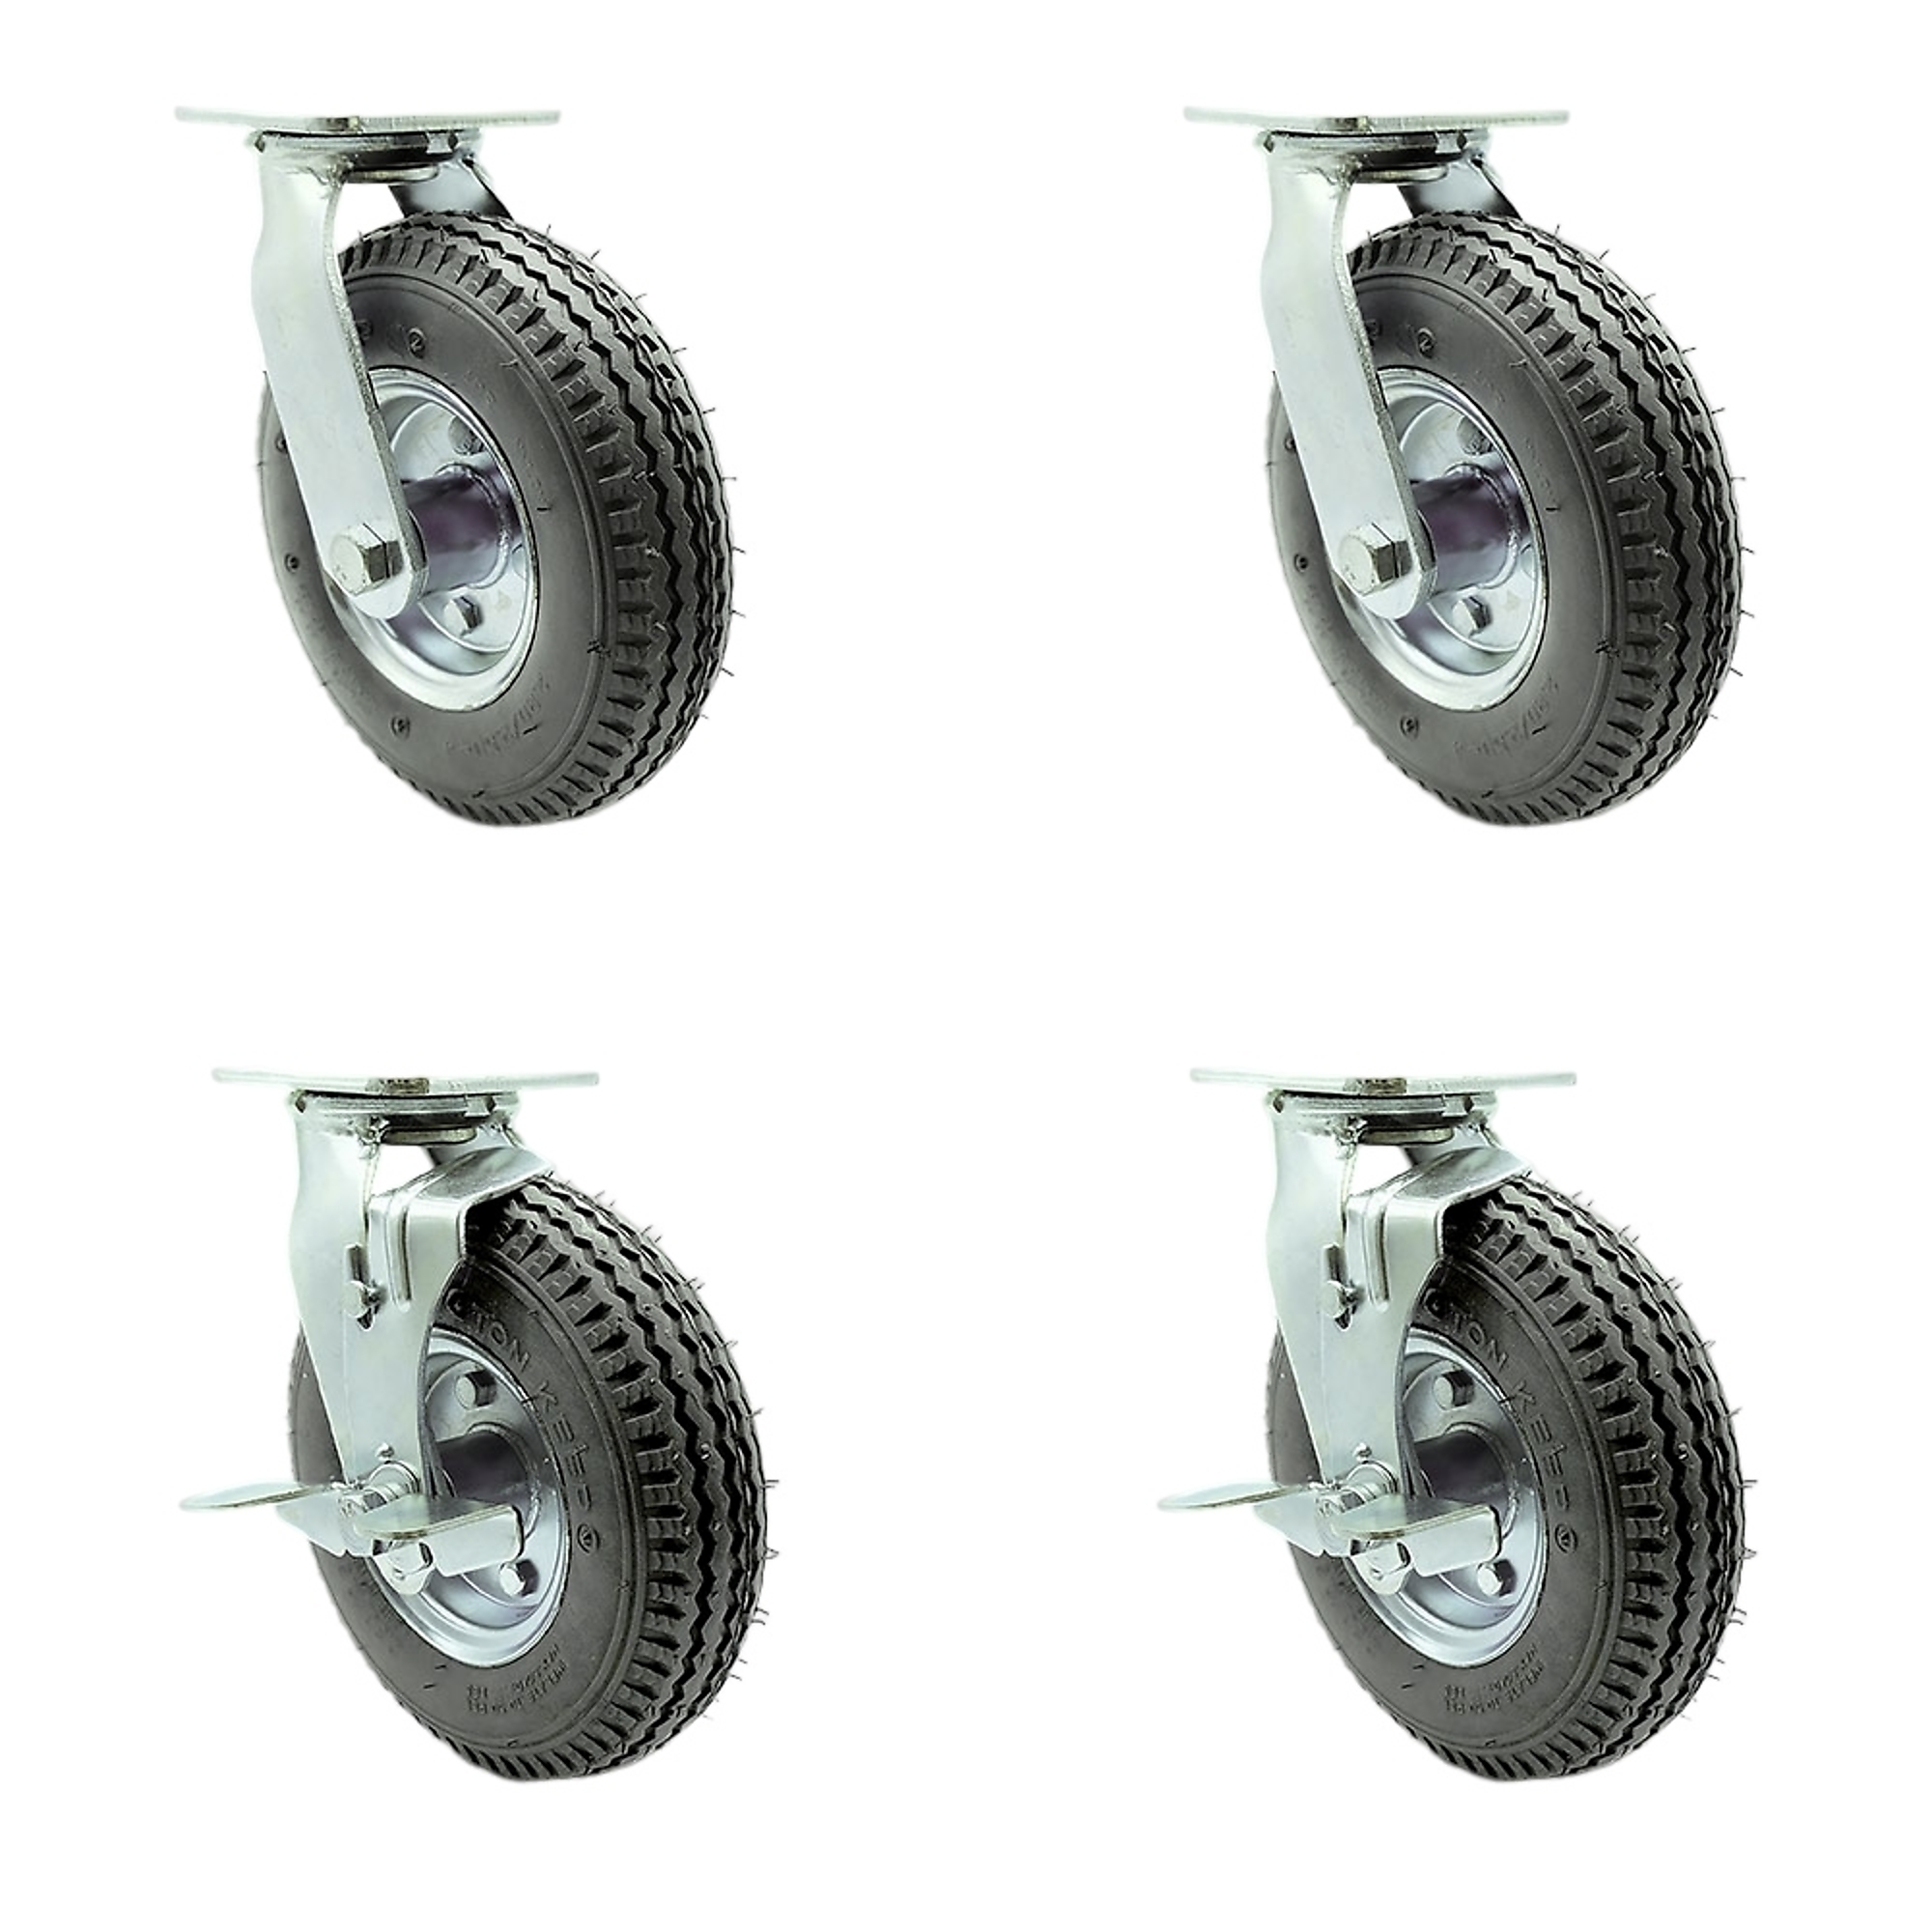 8Inch x 2 1/2Inch Plate Casters, Wheel Diameter 8 in, Caster Type Swivel, Package (qty.) 4, Model - Service Caster SCC-100S280-PNB-GRY-BSL-2-TLB-2